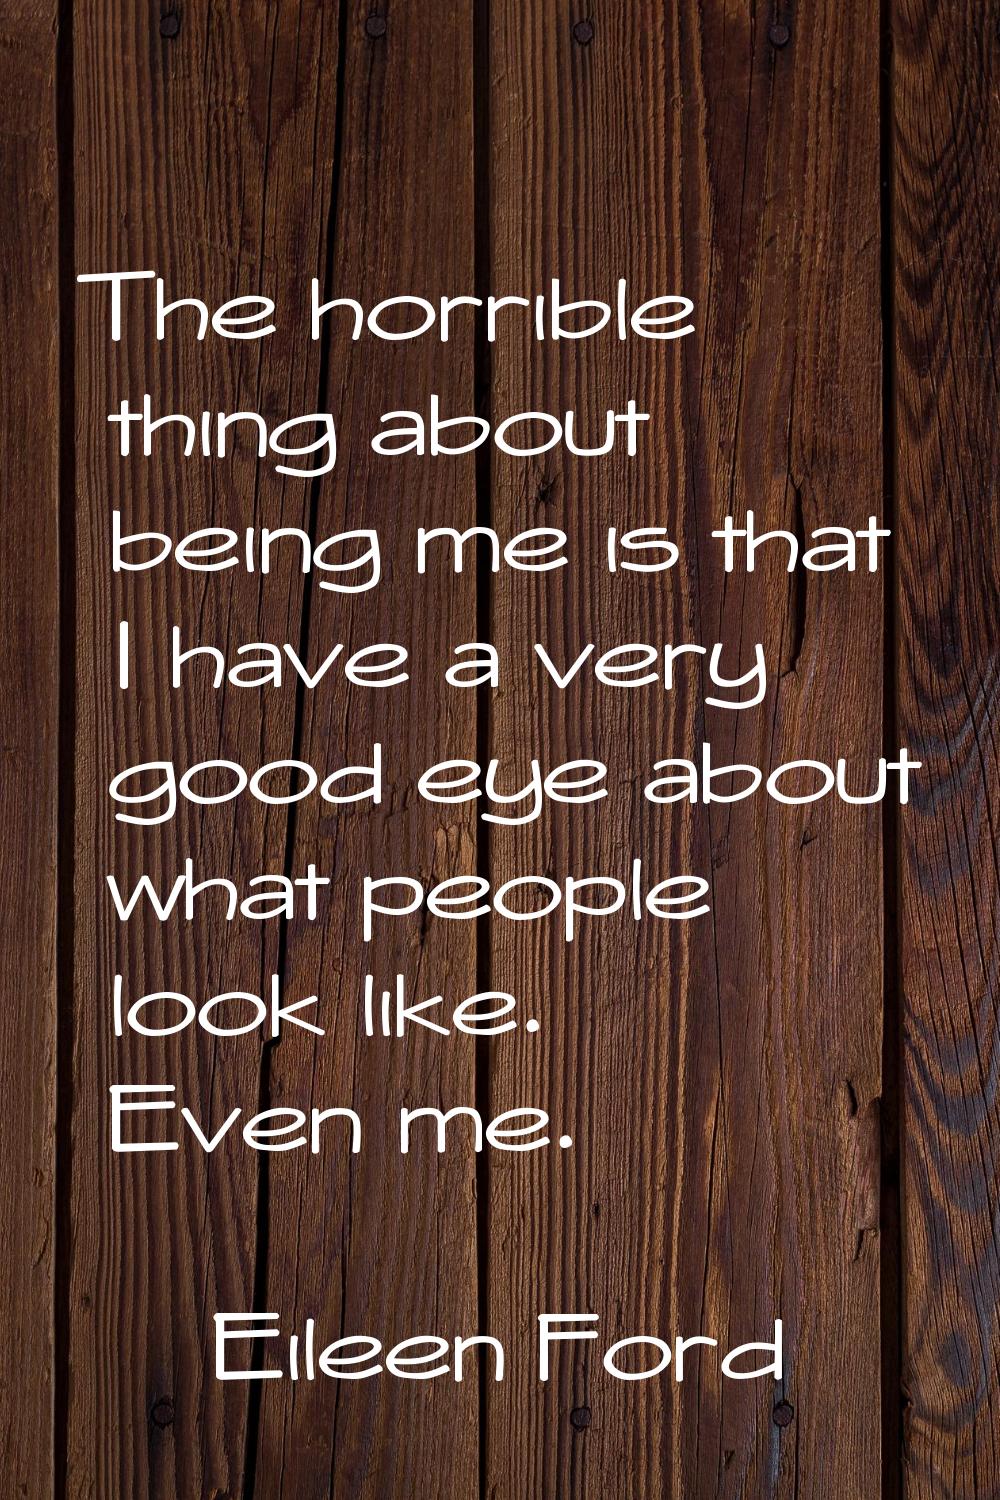 The horrible thing about being me is that I have a very good eye about what people look like. Even 